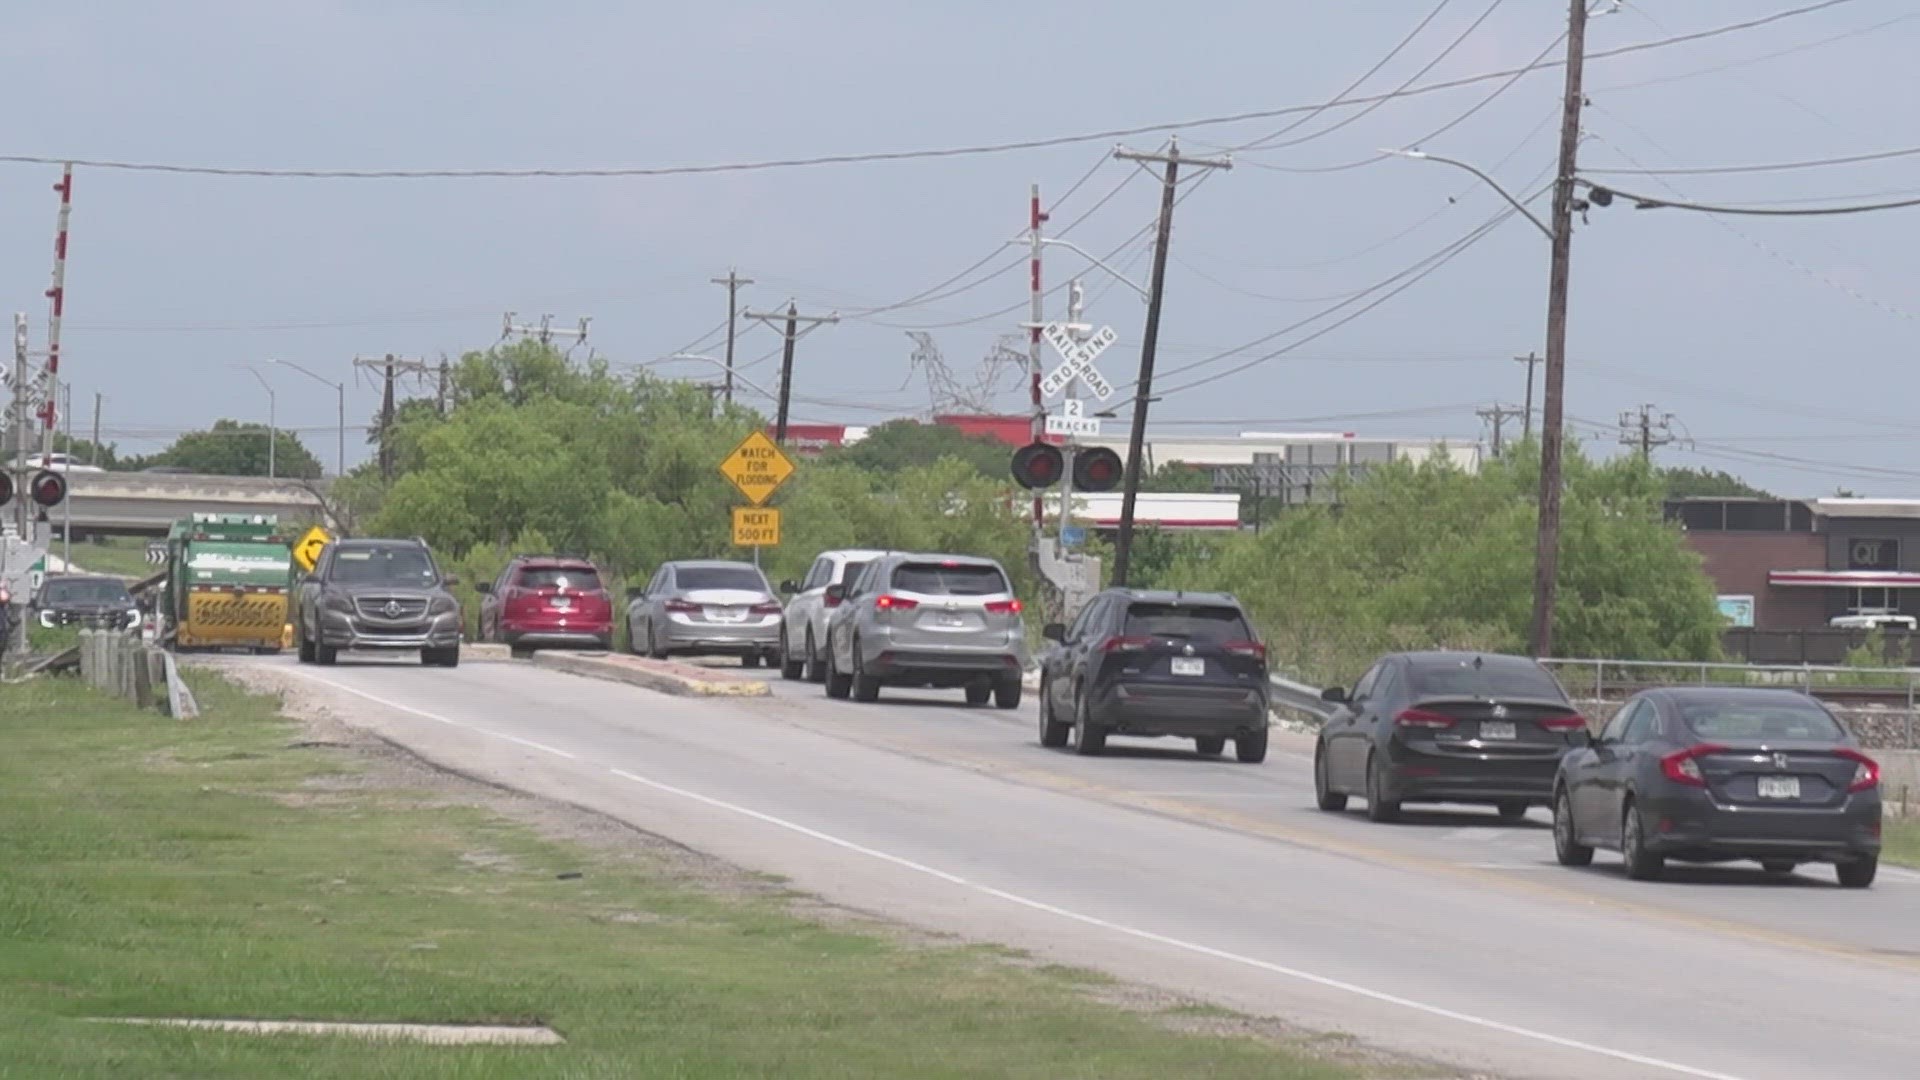 The federal government will pay for most of the bridge's construction, which should begin in 2026. Almost 18,000 cars cross the northern Fort Worth tracks each day.